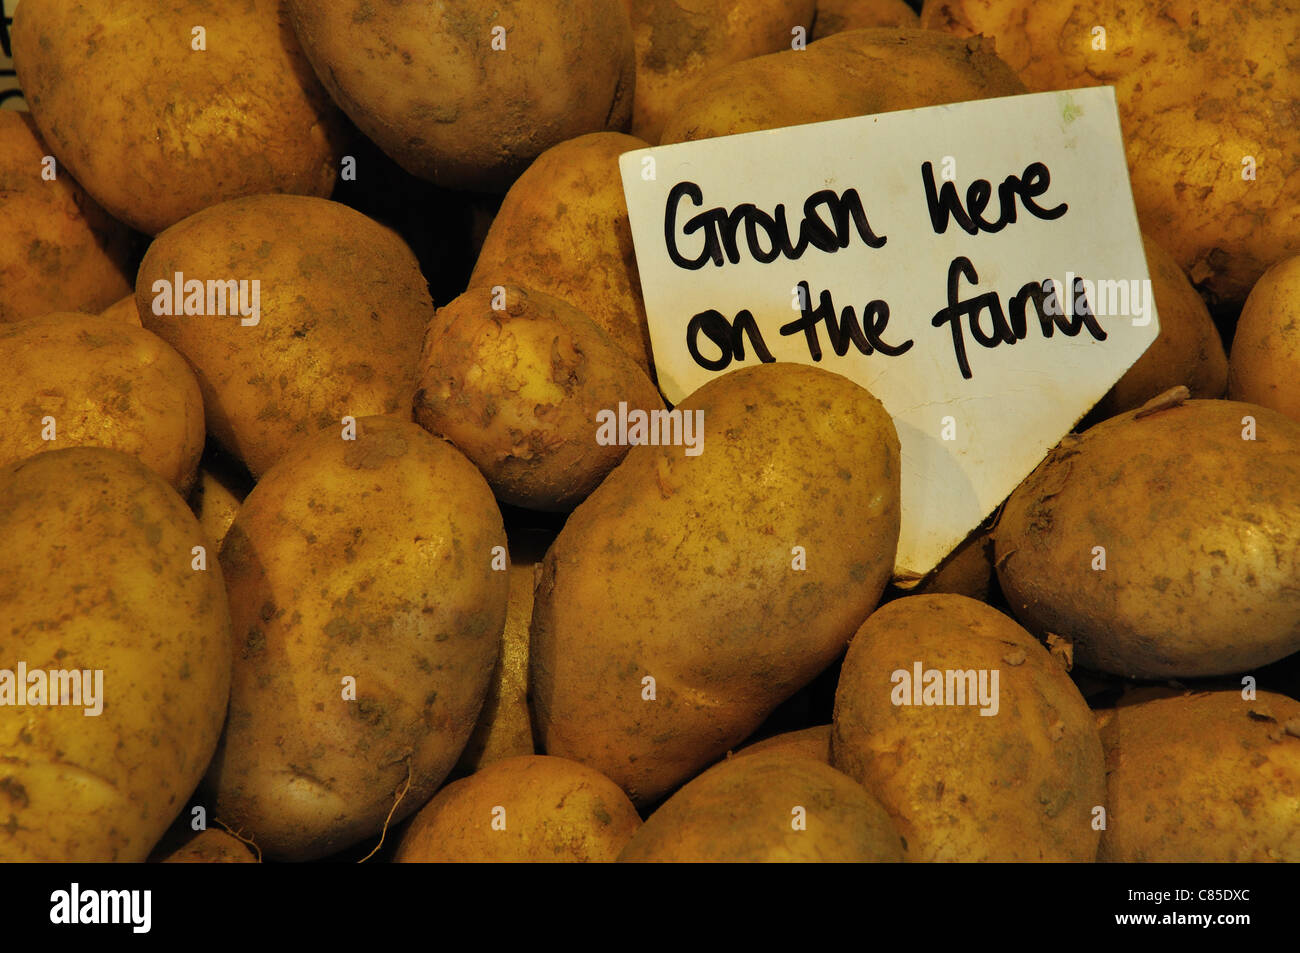 Potatoes grown on the farm ready to sell UK Stock Photo